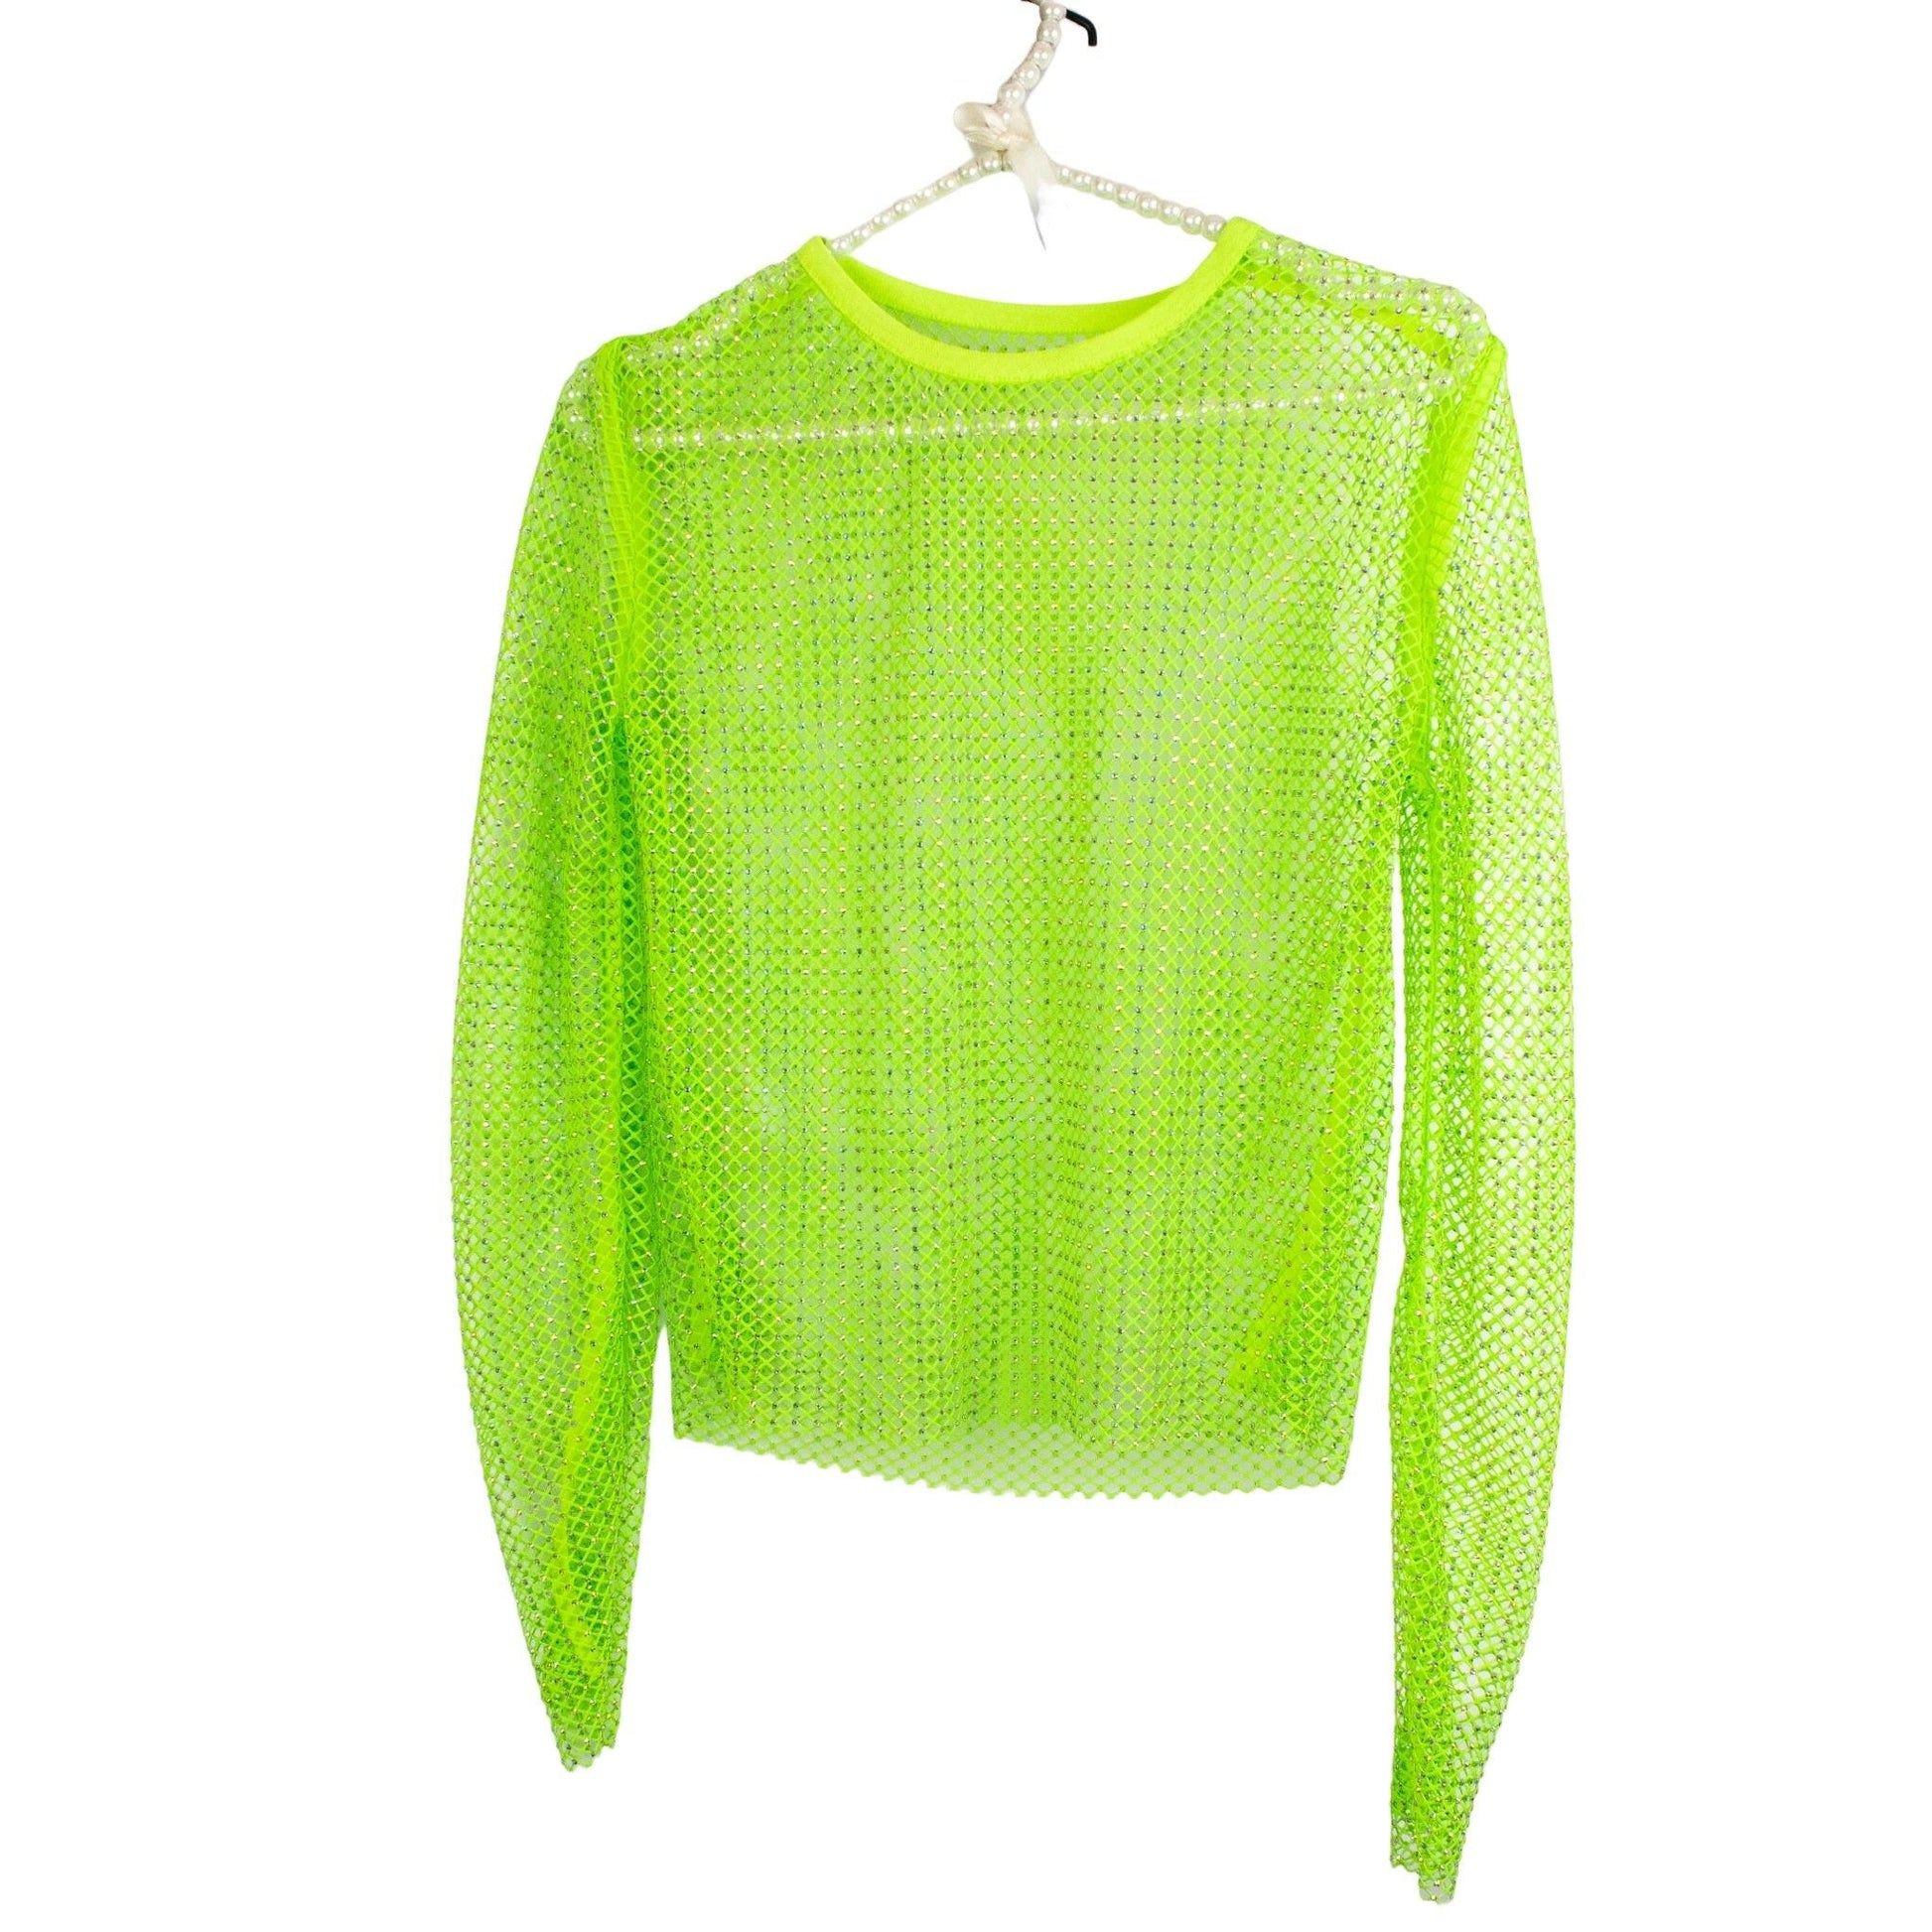 Rhinestone Studded Long Sleeve Mesh Top - Your Shiny Clothes